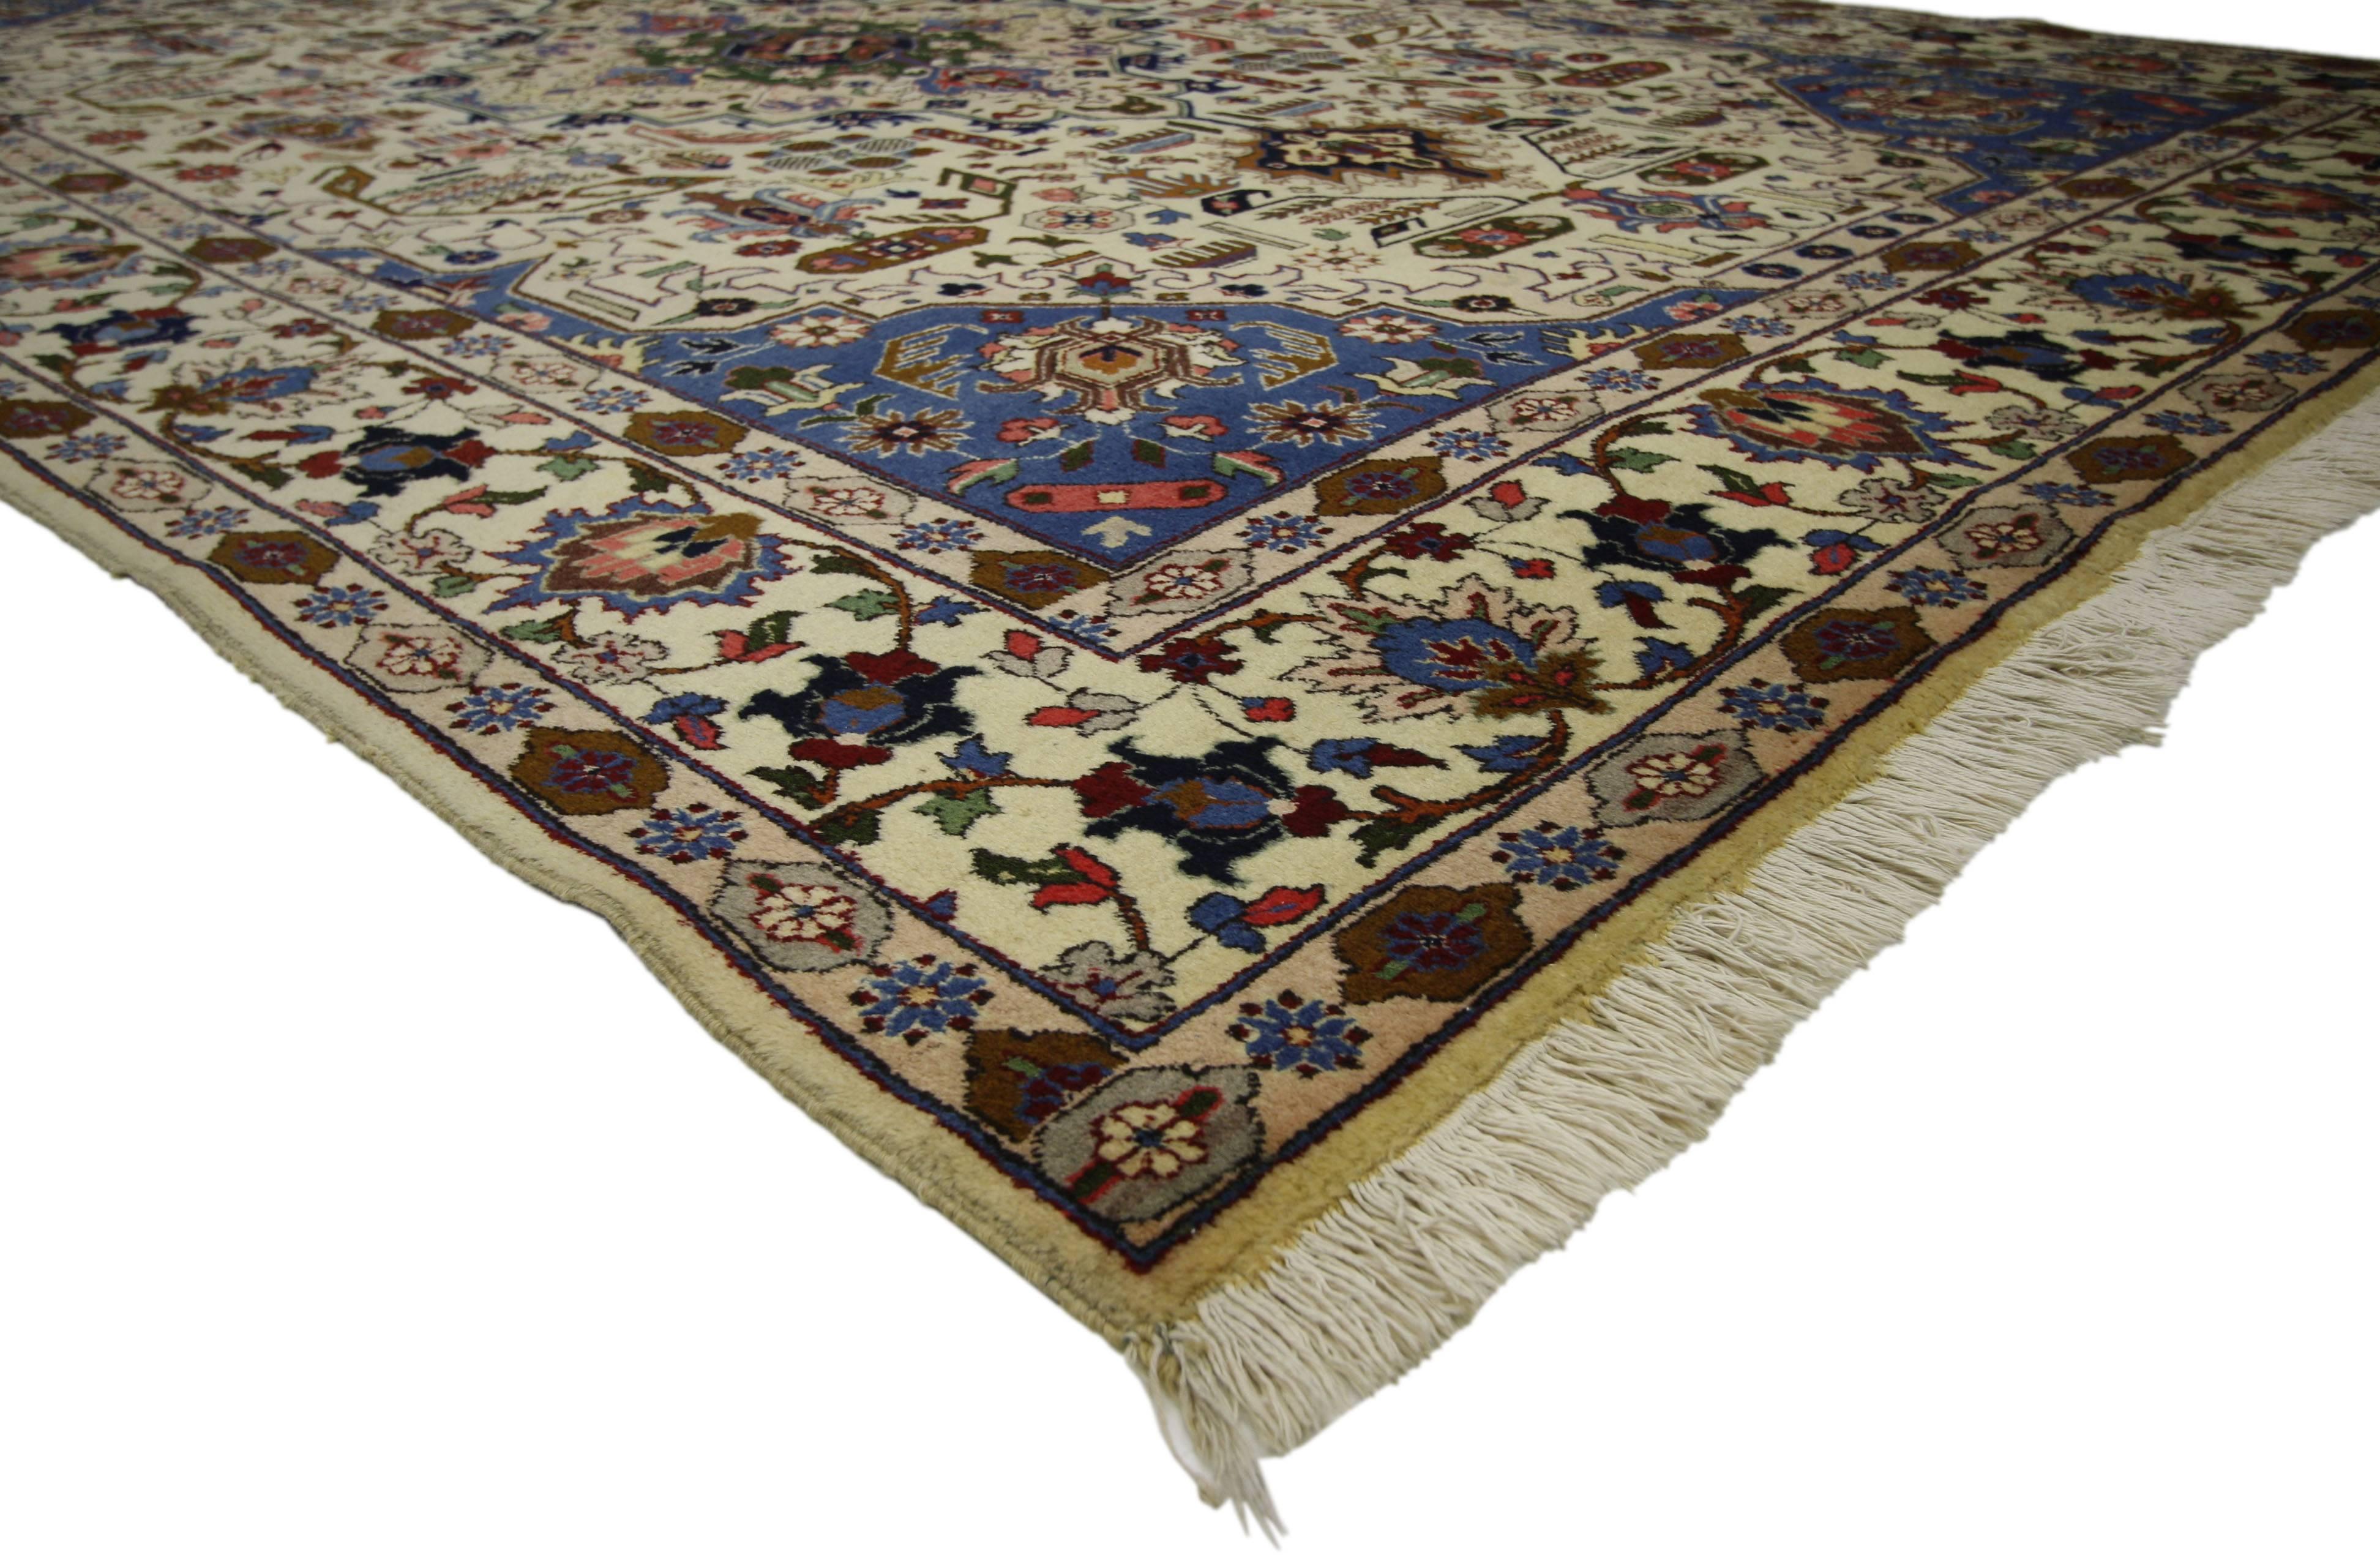 71755 vintage Persian Tabriz Area rug with modern traditional style. Vintage hand-knotted wool Persian Tabriz carpet with medallion and allover geometric floral motifs. Features a decorated ivory field framed by blue corner spandrels and floral